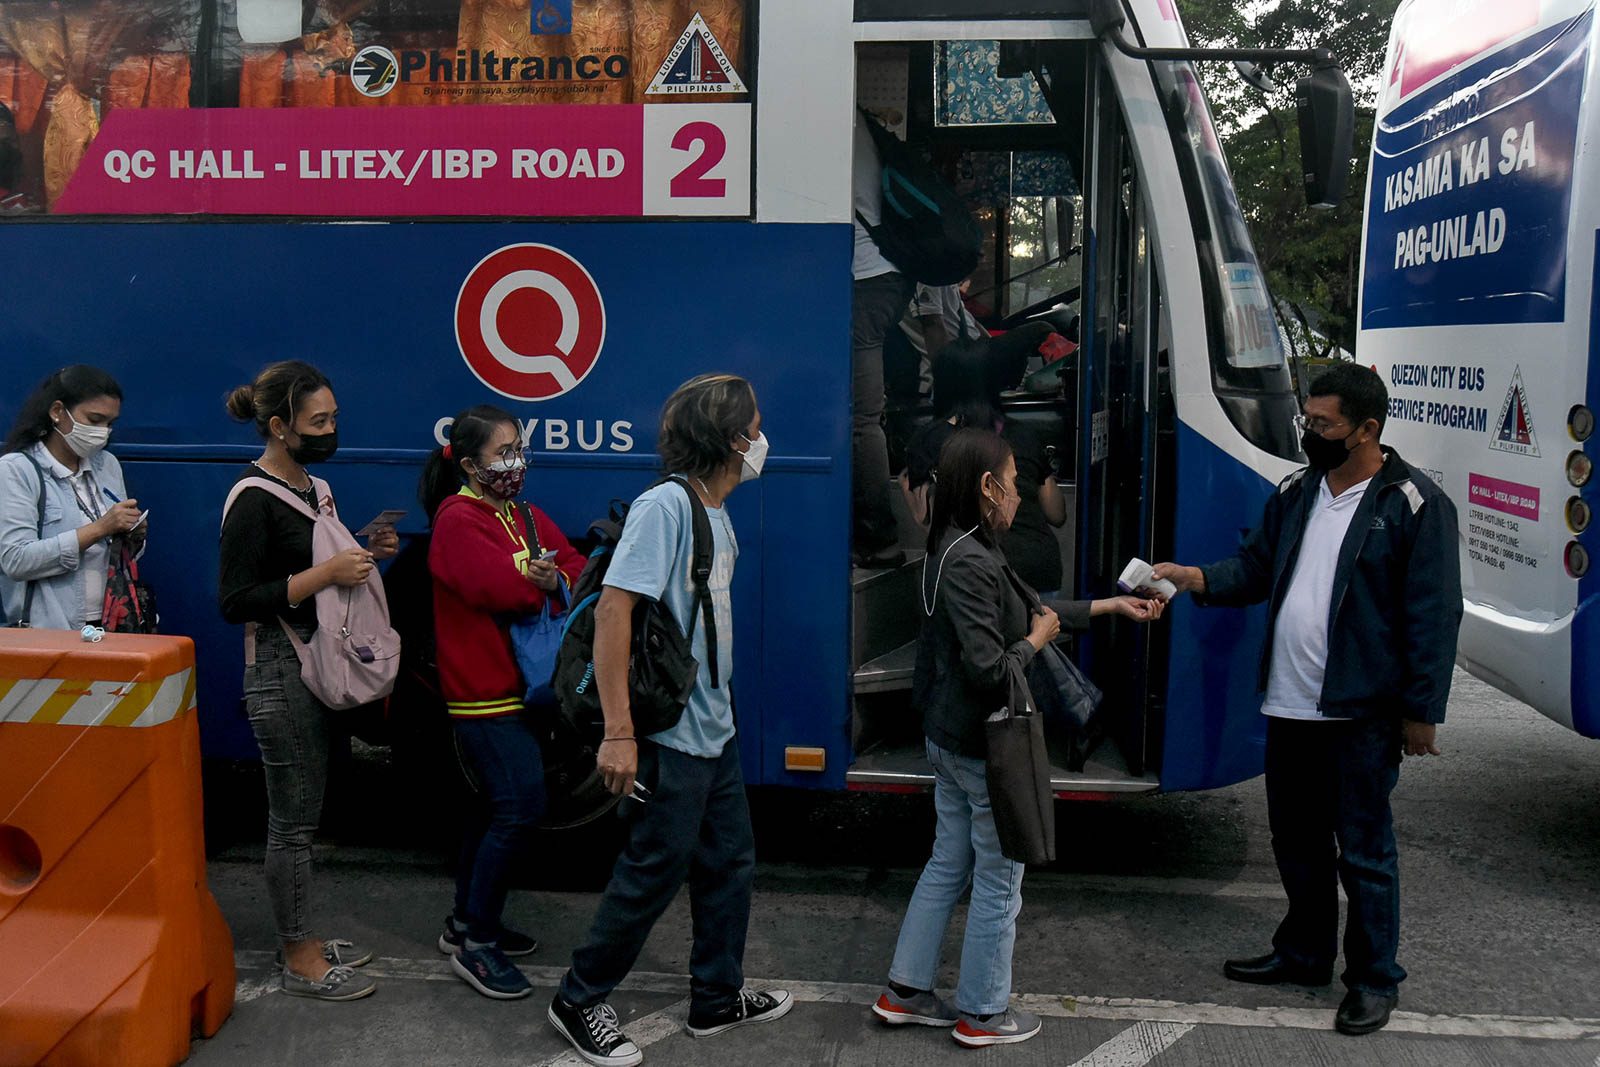 Metro Manila, 38 other areas to enter Alert Level 1 in March